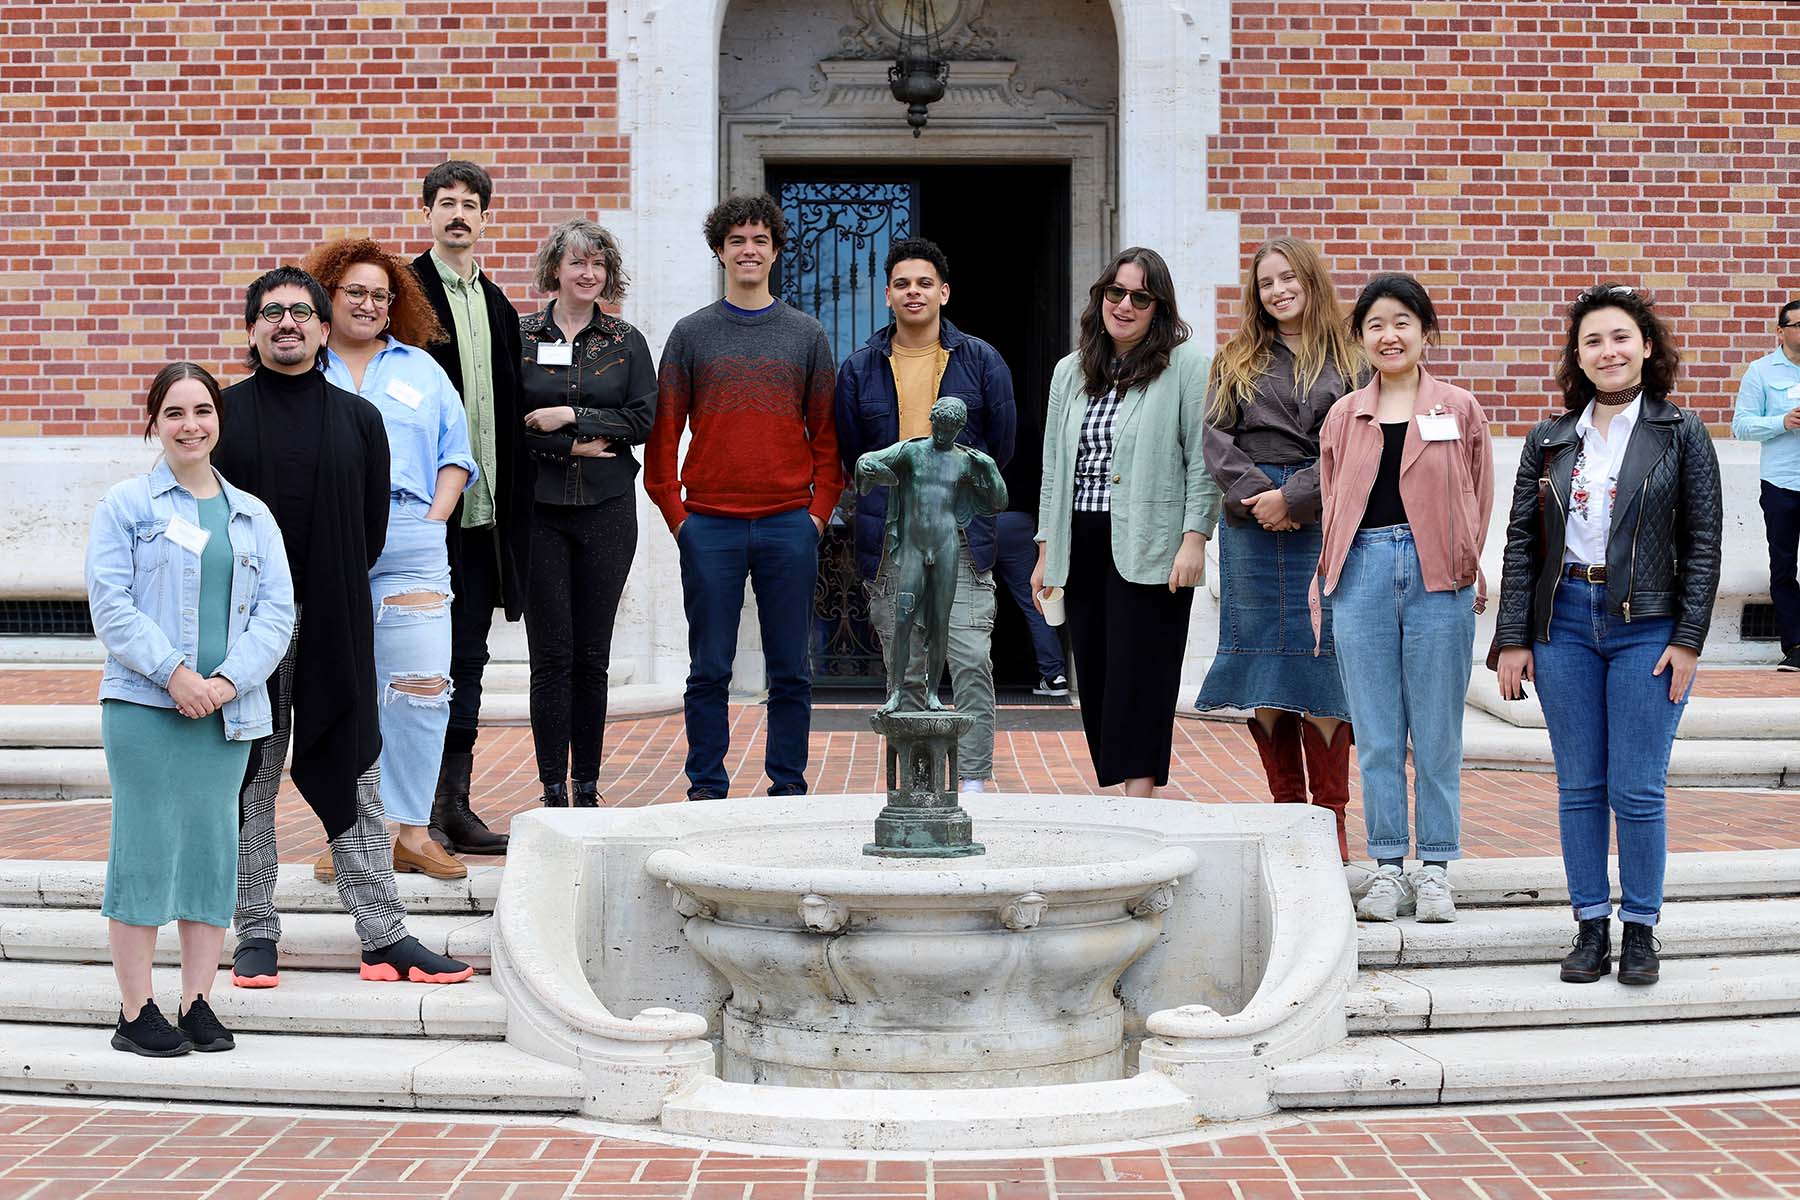 A group of graduate students pose in front of a brick building with a fountain. 